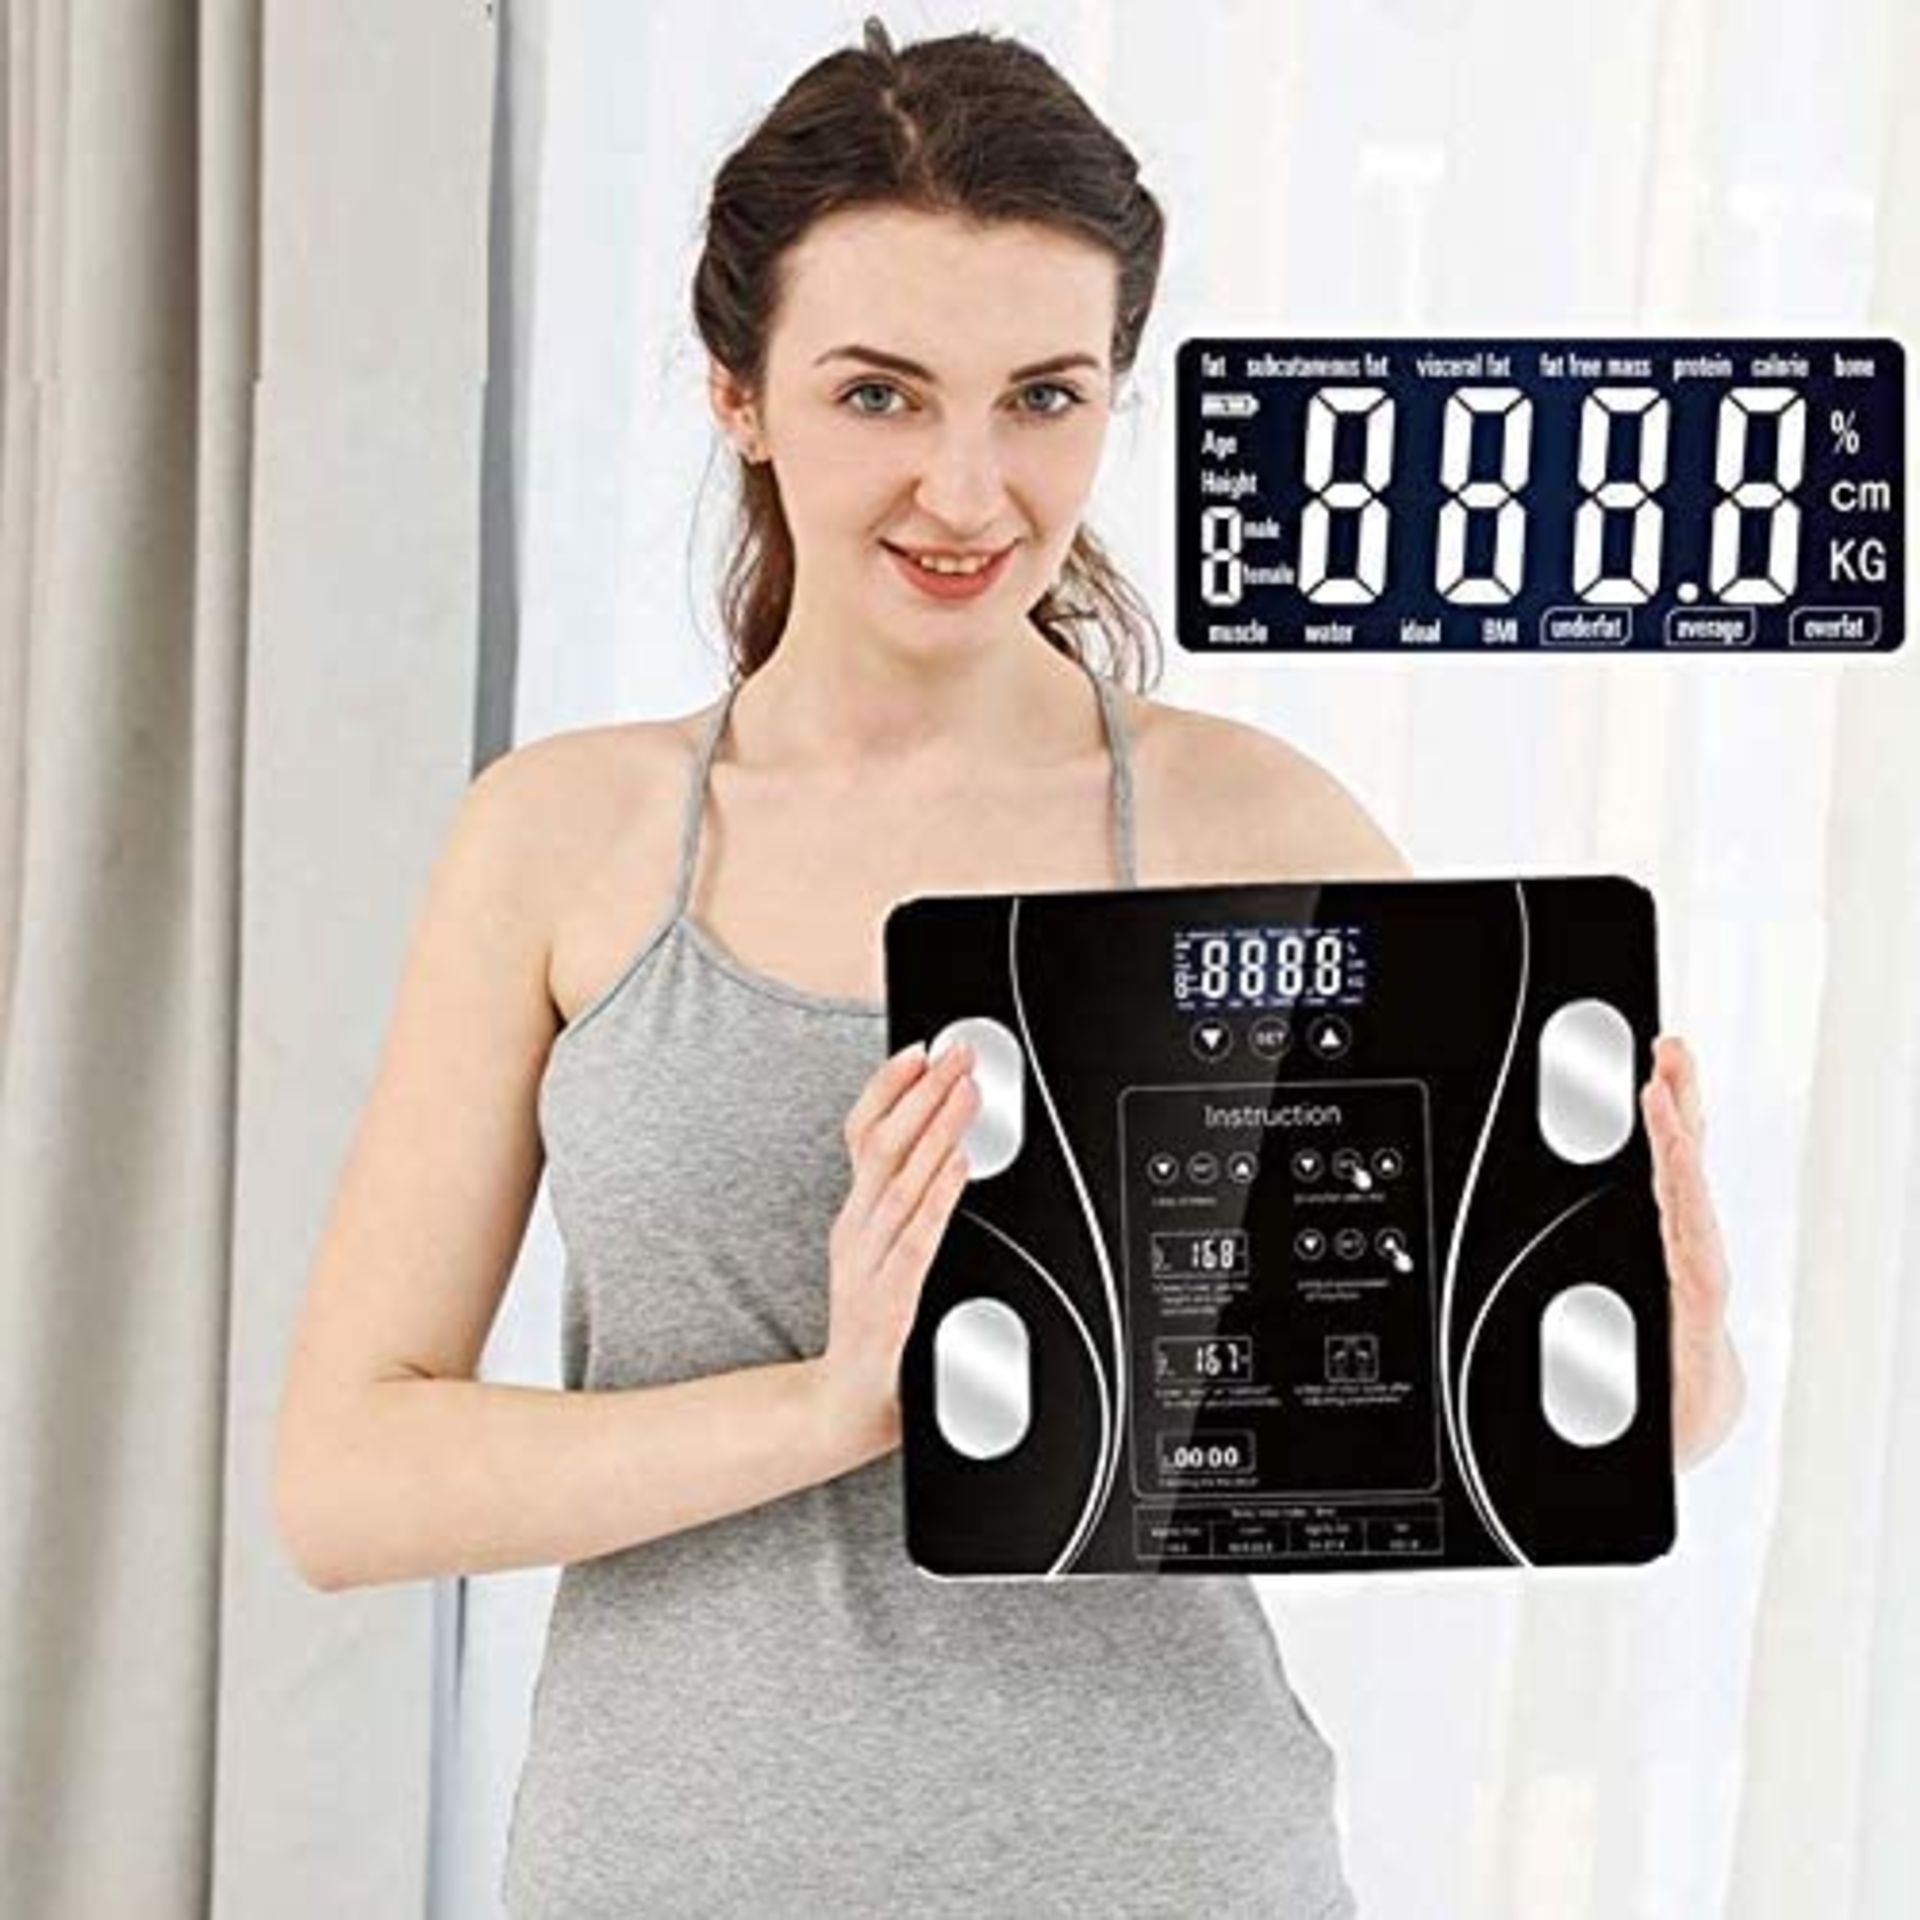 Exeton, Body Weighing Scale, Bluetooth Smart, Body Fat, BMI, 180kg/396lbs, USB Rechargeable - Image 2 of 2